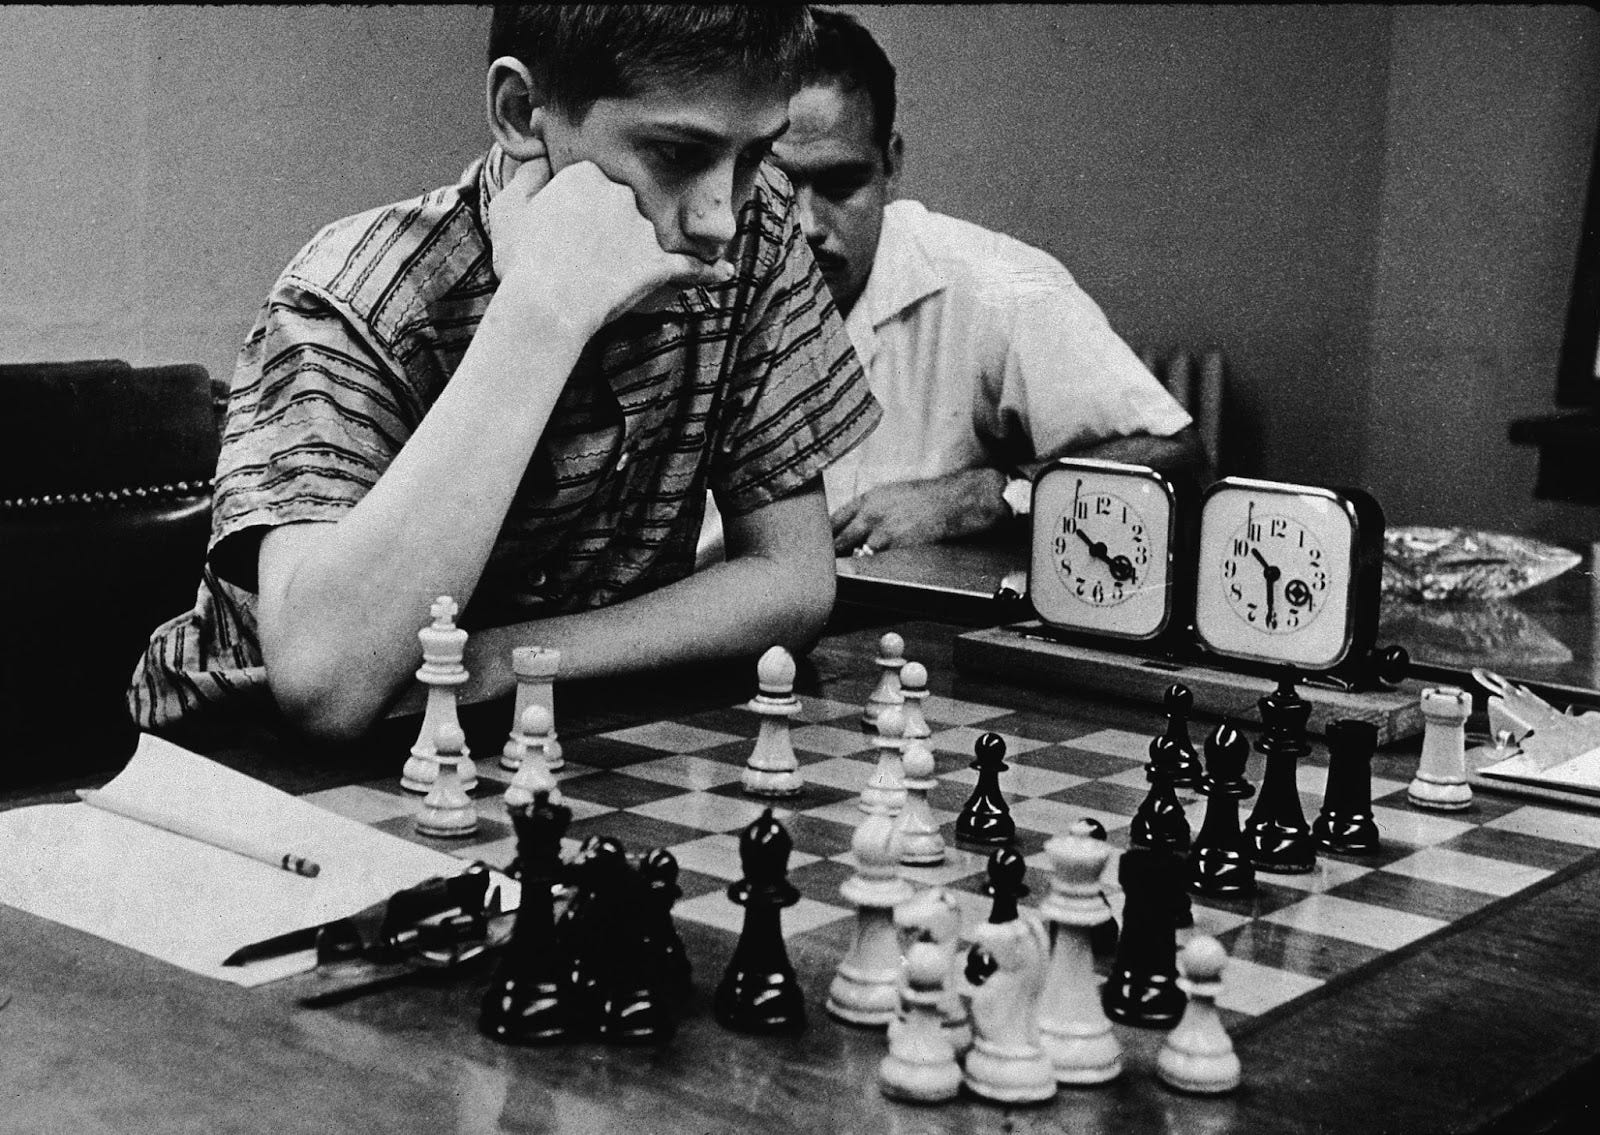 Who are the most controversial or unorthodox chess players? Why